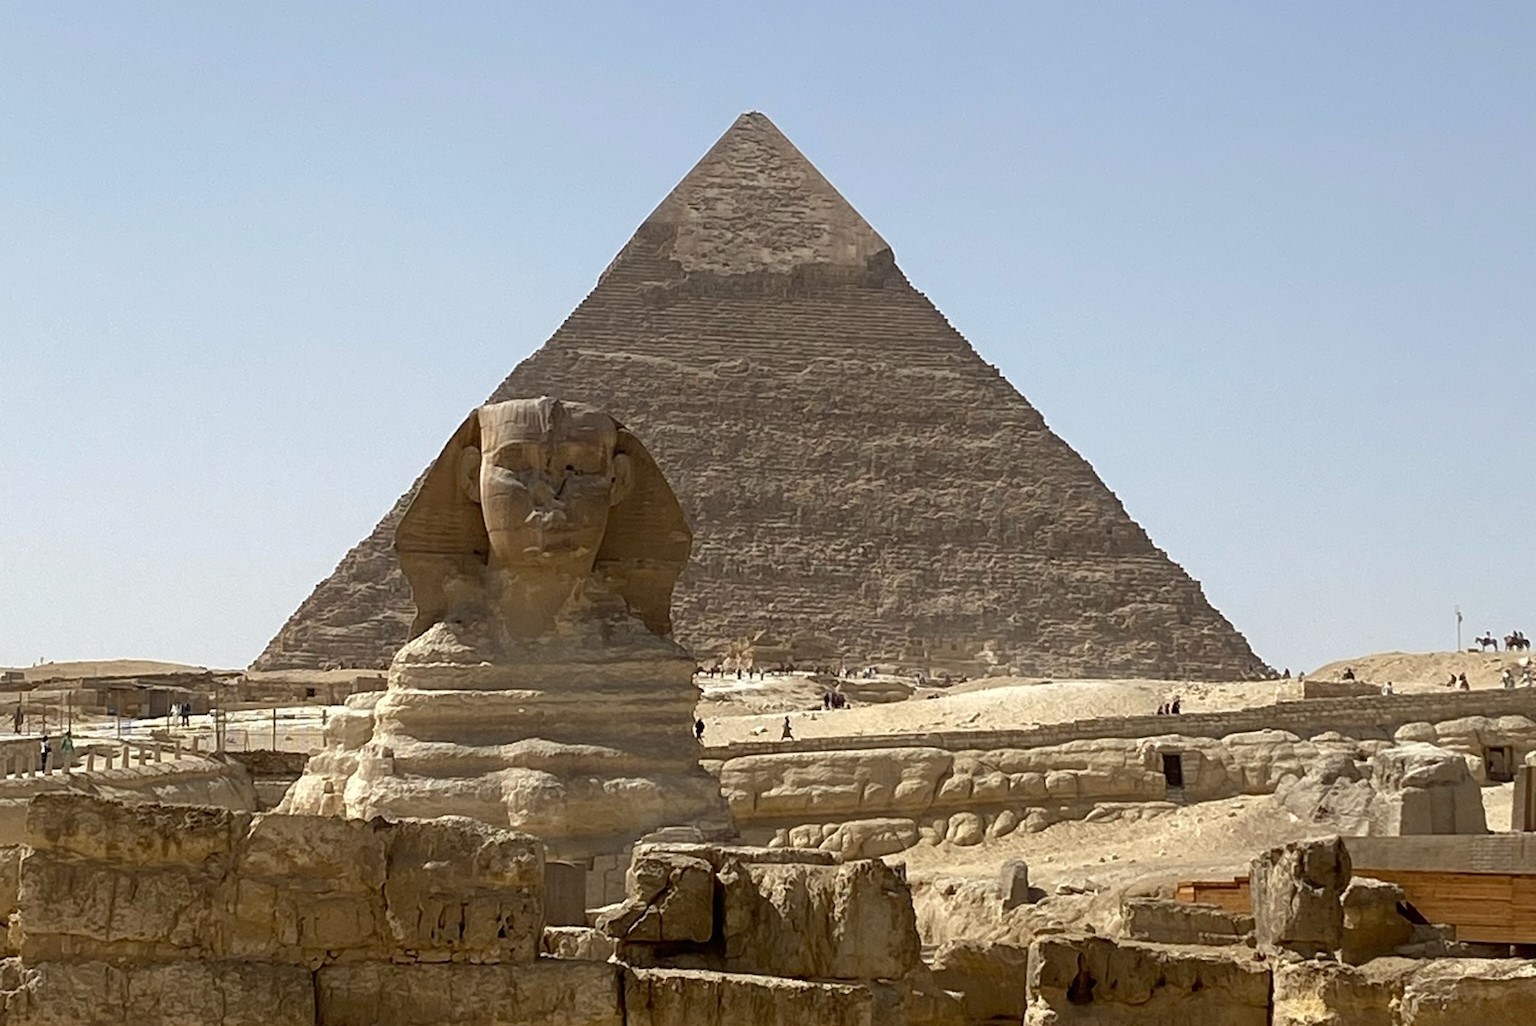 The Great Sphinx in the foreground and the Great Pyramid in the background, located in Egypt